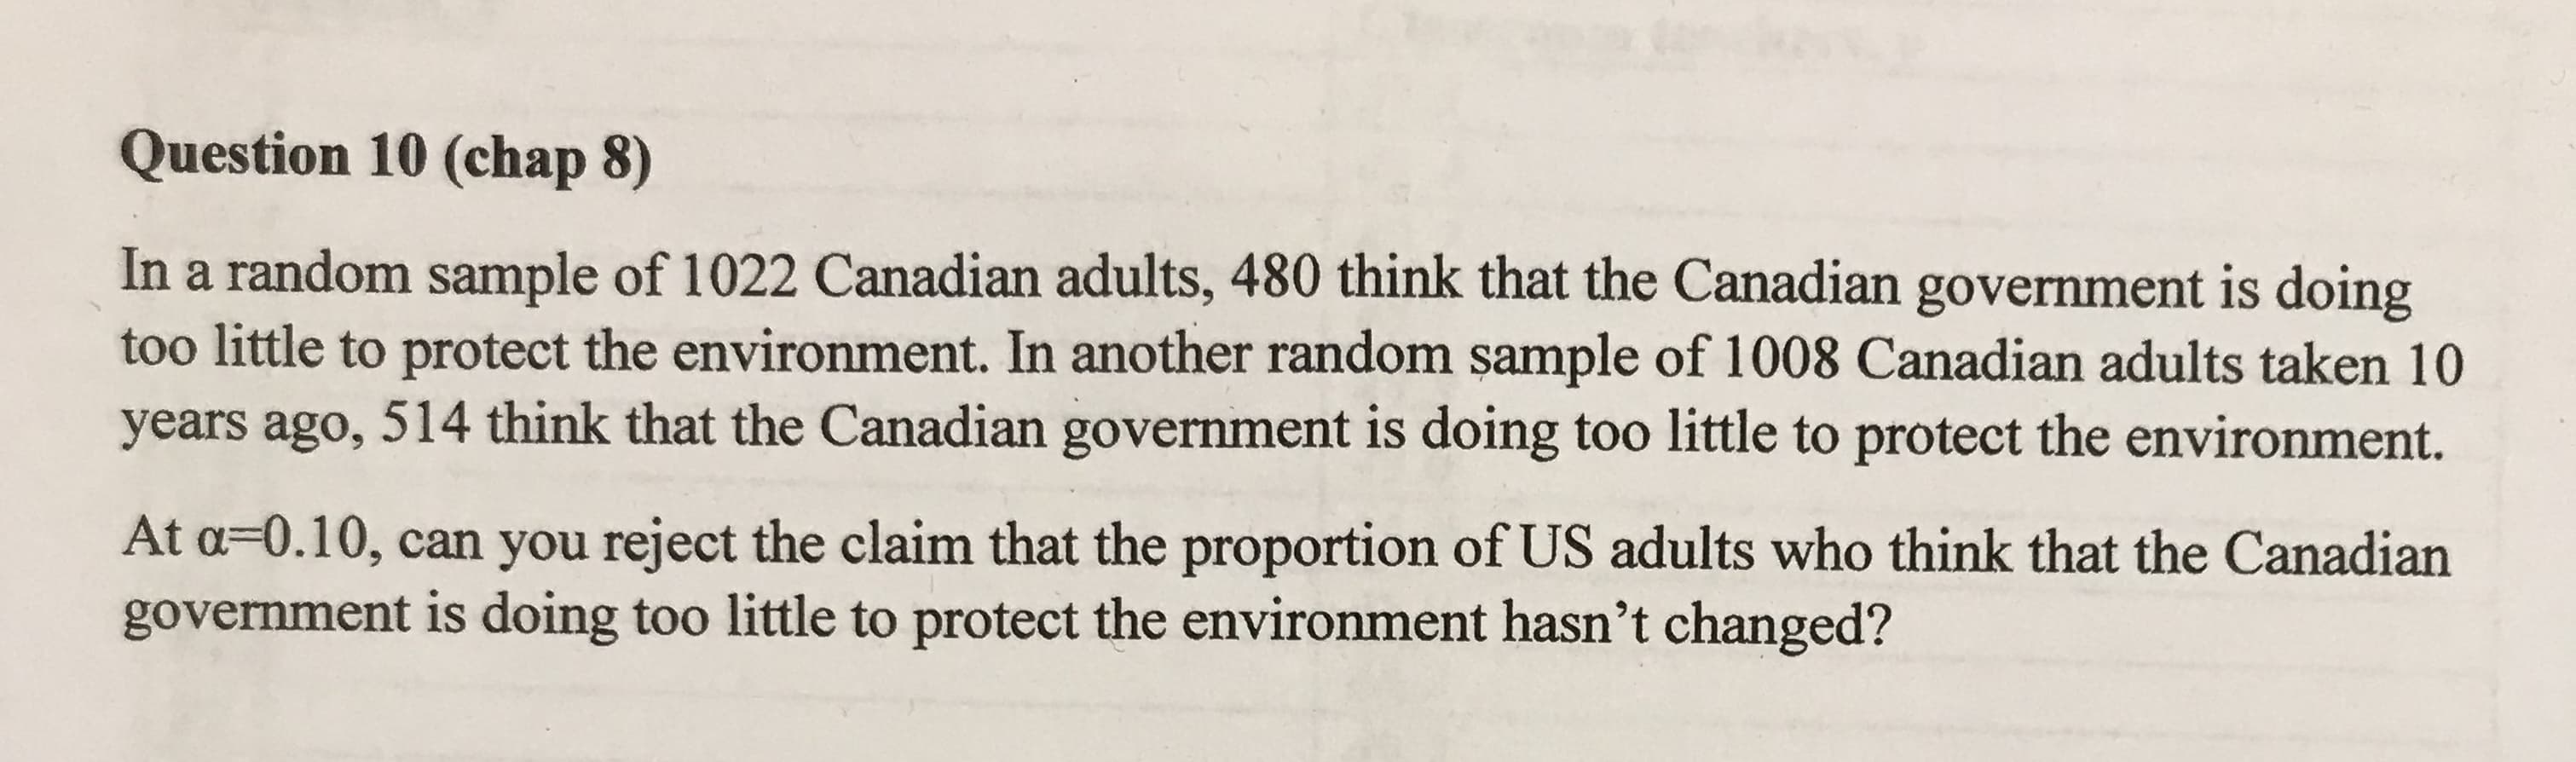 In a random sample of 1022 Canadian adults, 480 think that the Canadian government is doing
too little to protect the environment. In another random sample of 1008 Canadian adults taken 10
years ago, 514 think that the Canadian government is doing too little to protect the environment.
At a=0.10, can you reject the claim that the proportion of US adults who think that the Canadian
government is doing too little to protect the environment hasn't changed?
